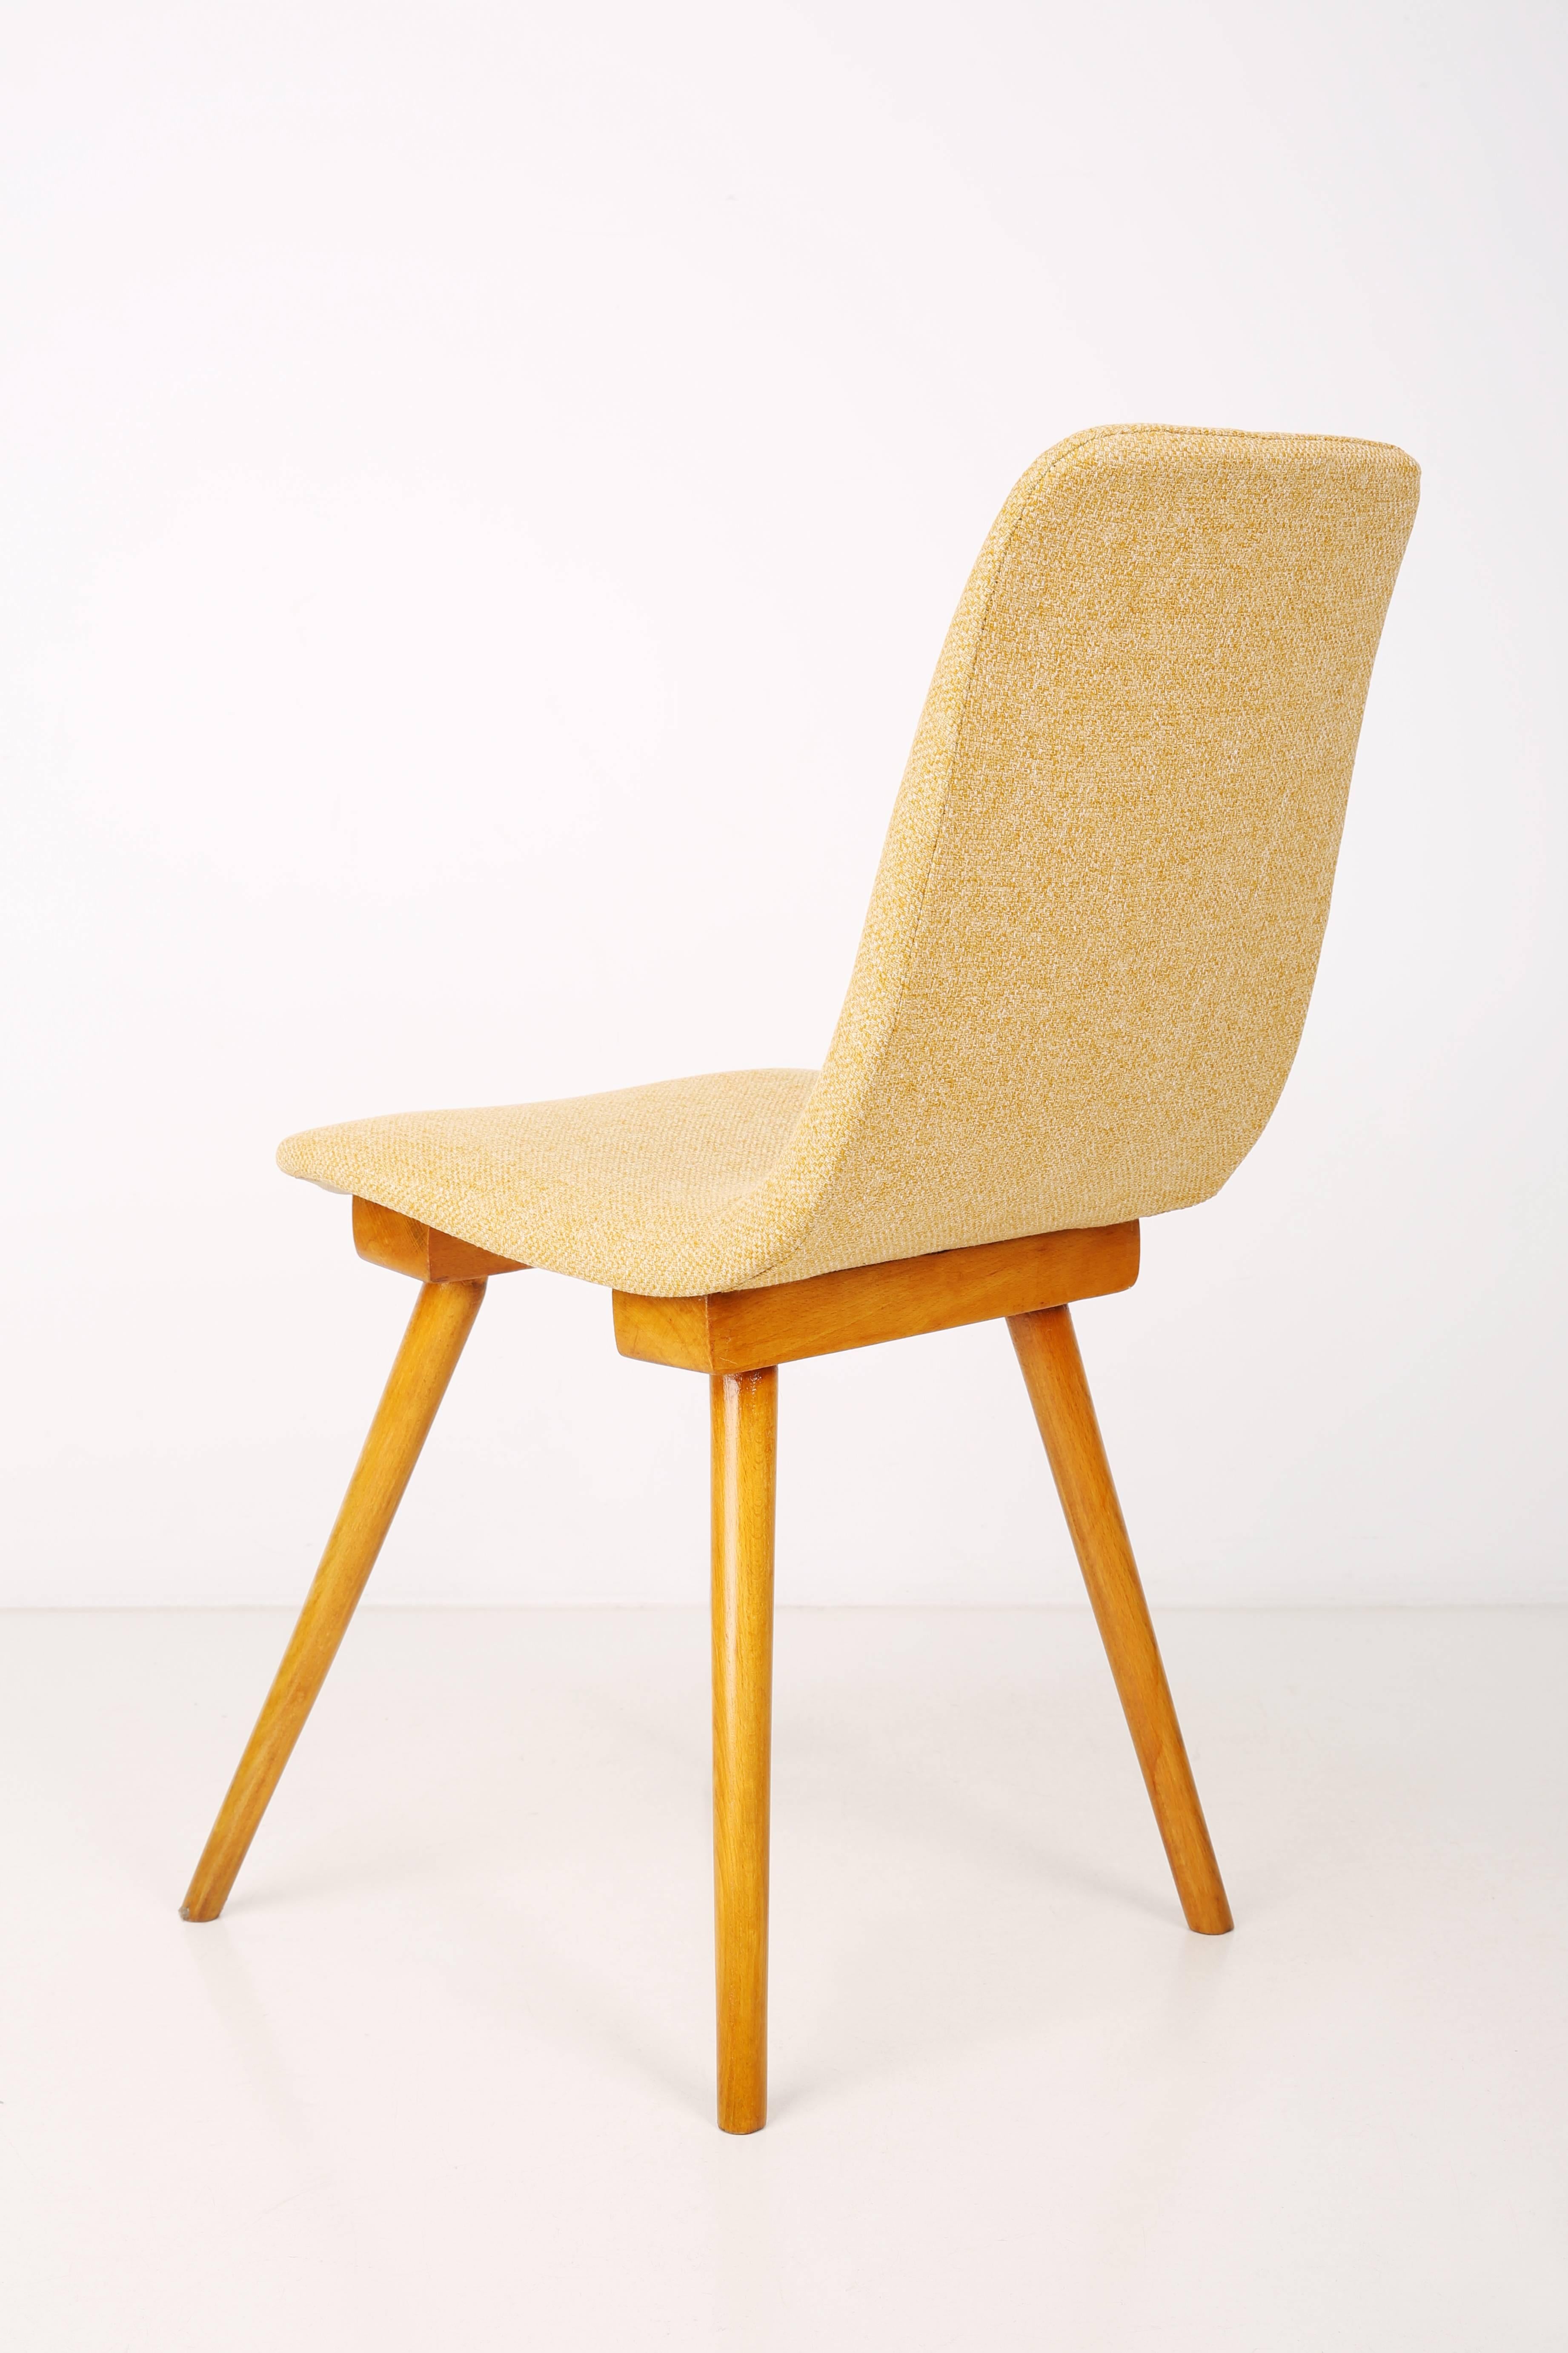 Mid-Century Modern 20th Century, Fameg, Yellow Vintage Chair, 1960s, Poland For Sale